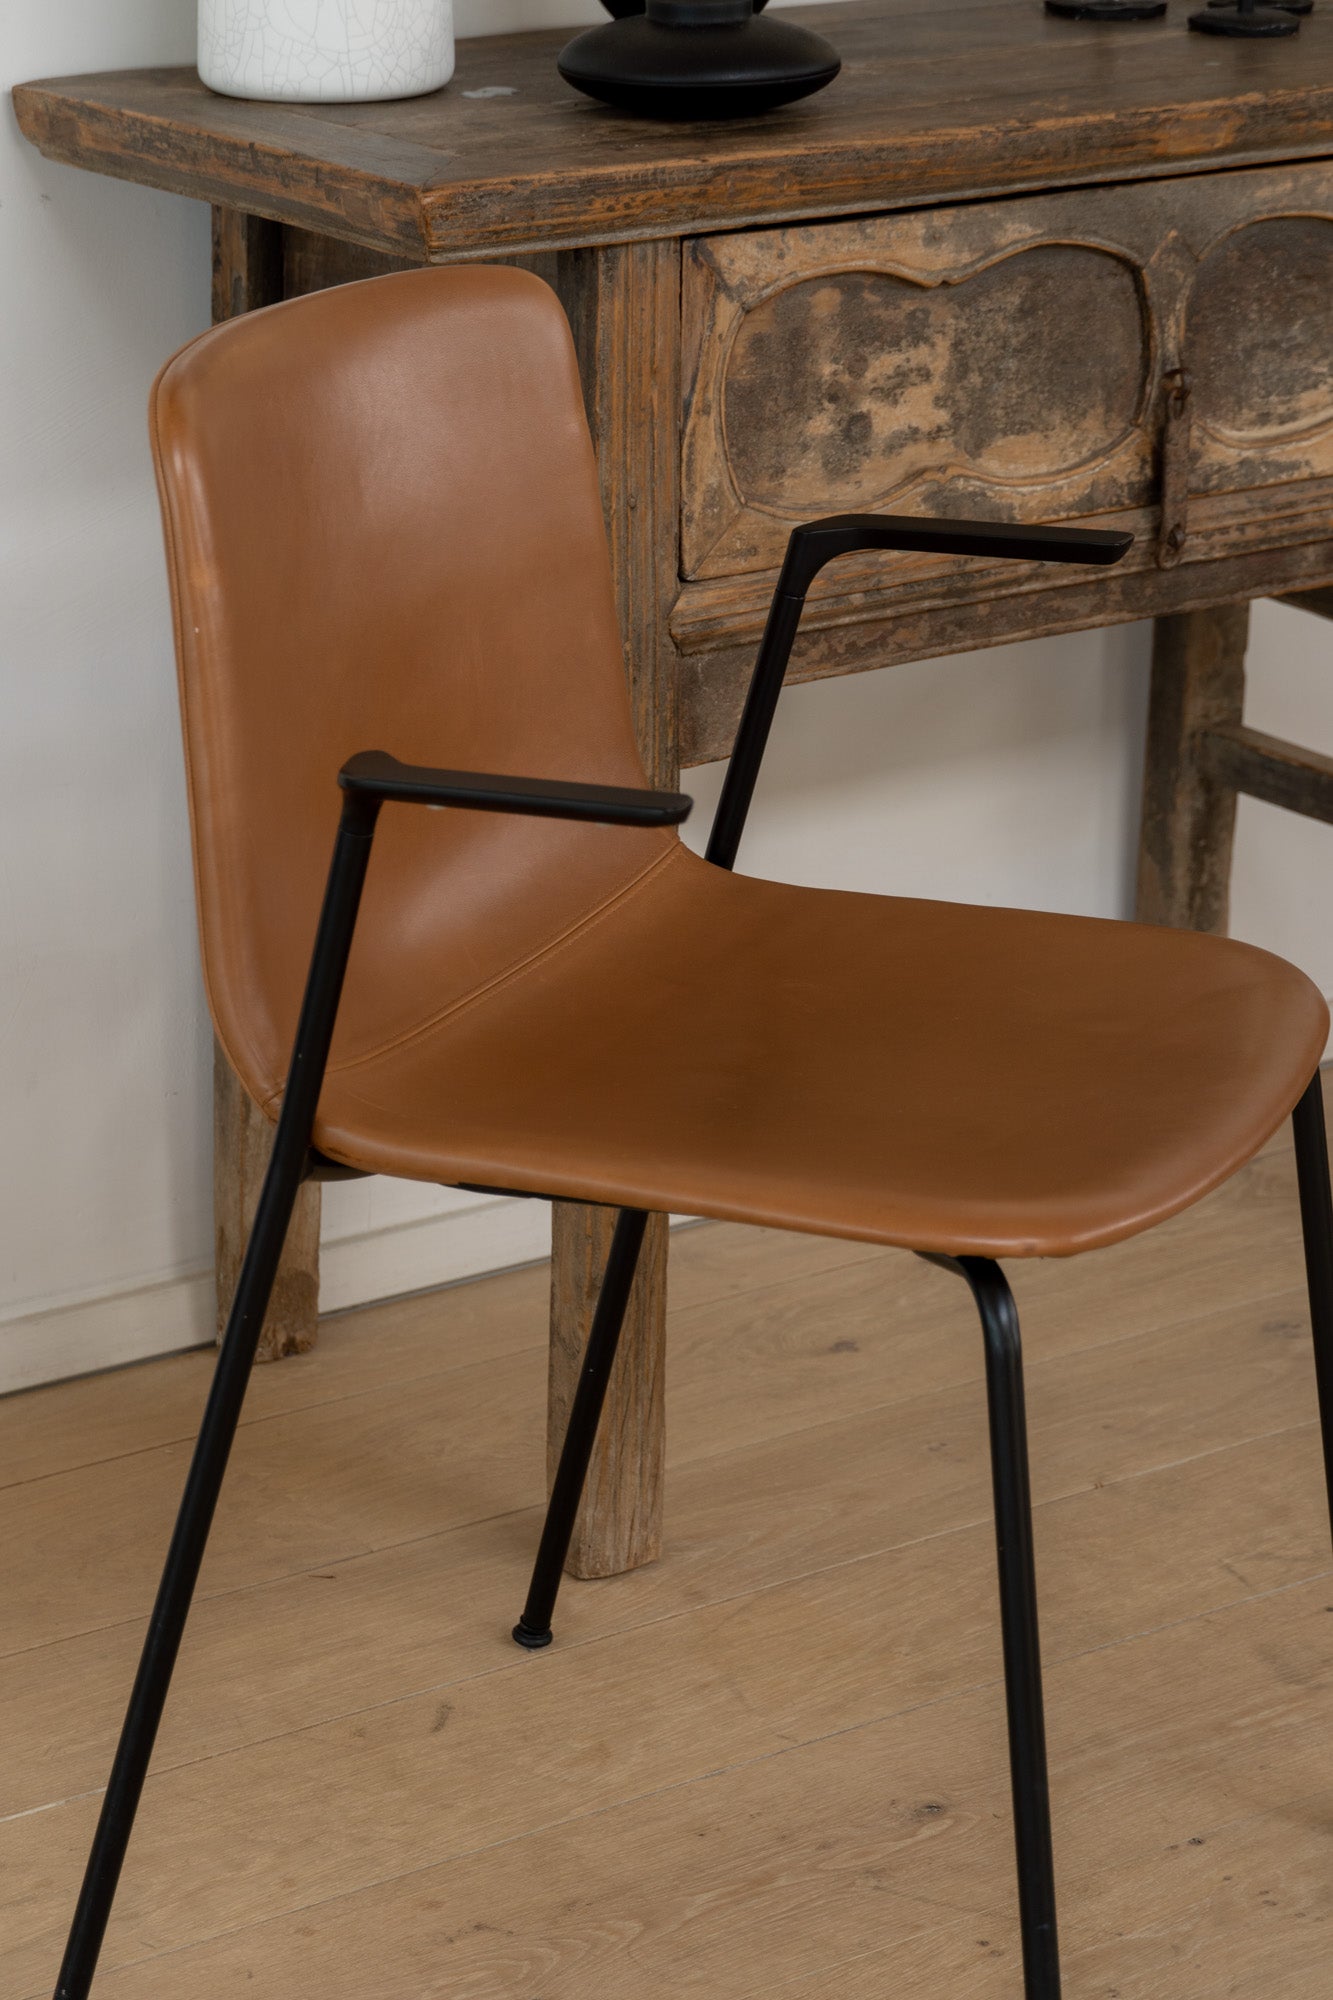 Fredericia Pato Chair - a sustainably designed chair with a black powder-coated frame and leather seating - Enter The Loft